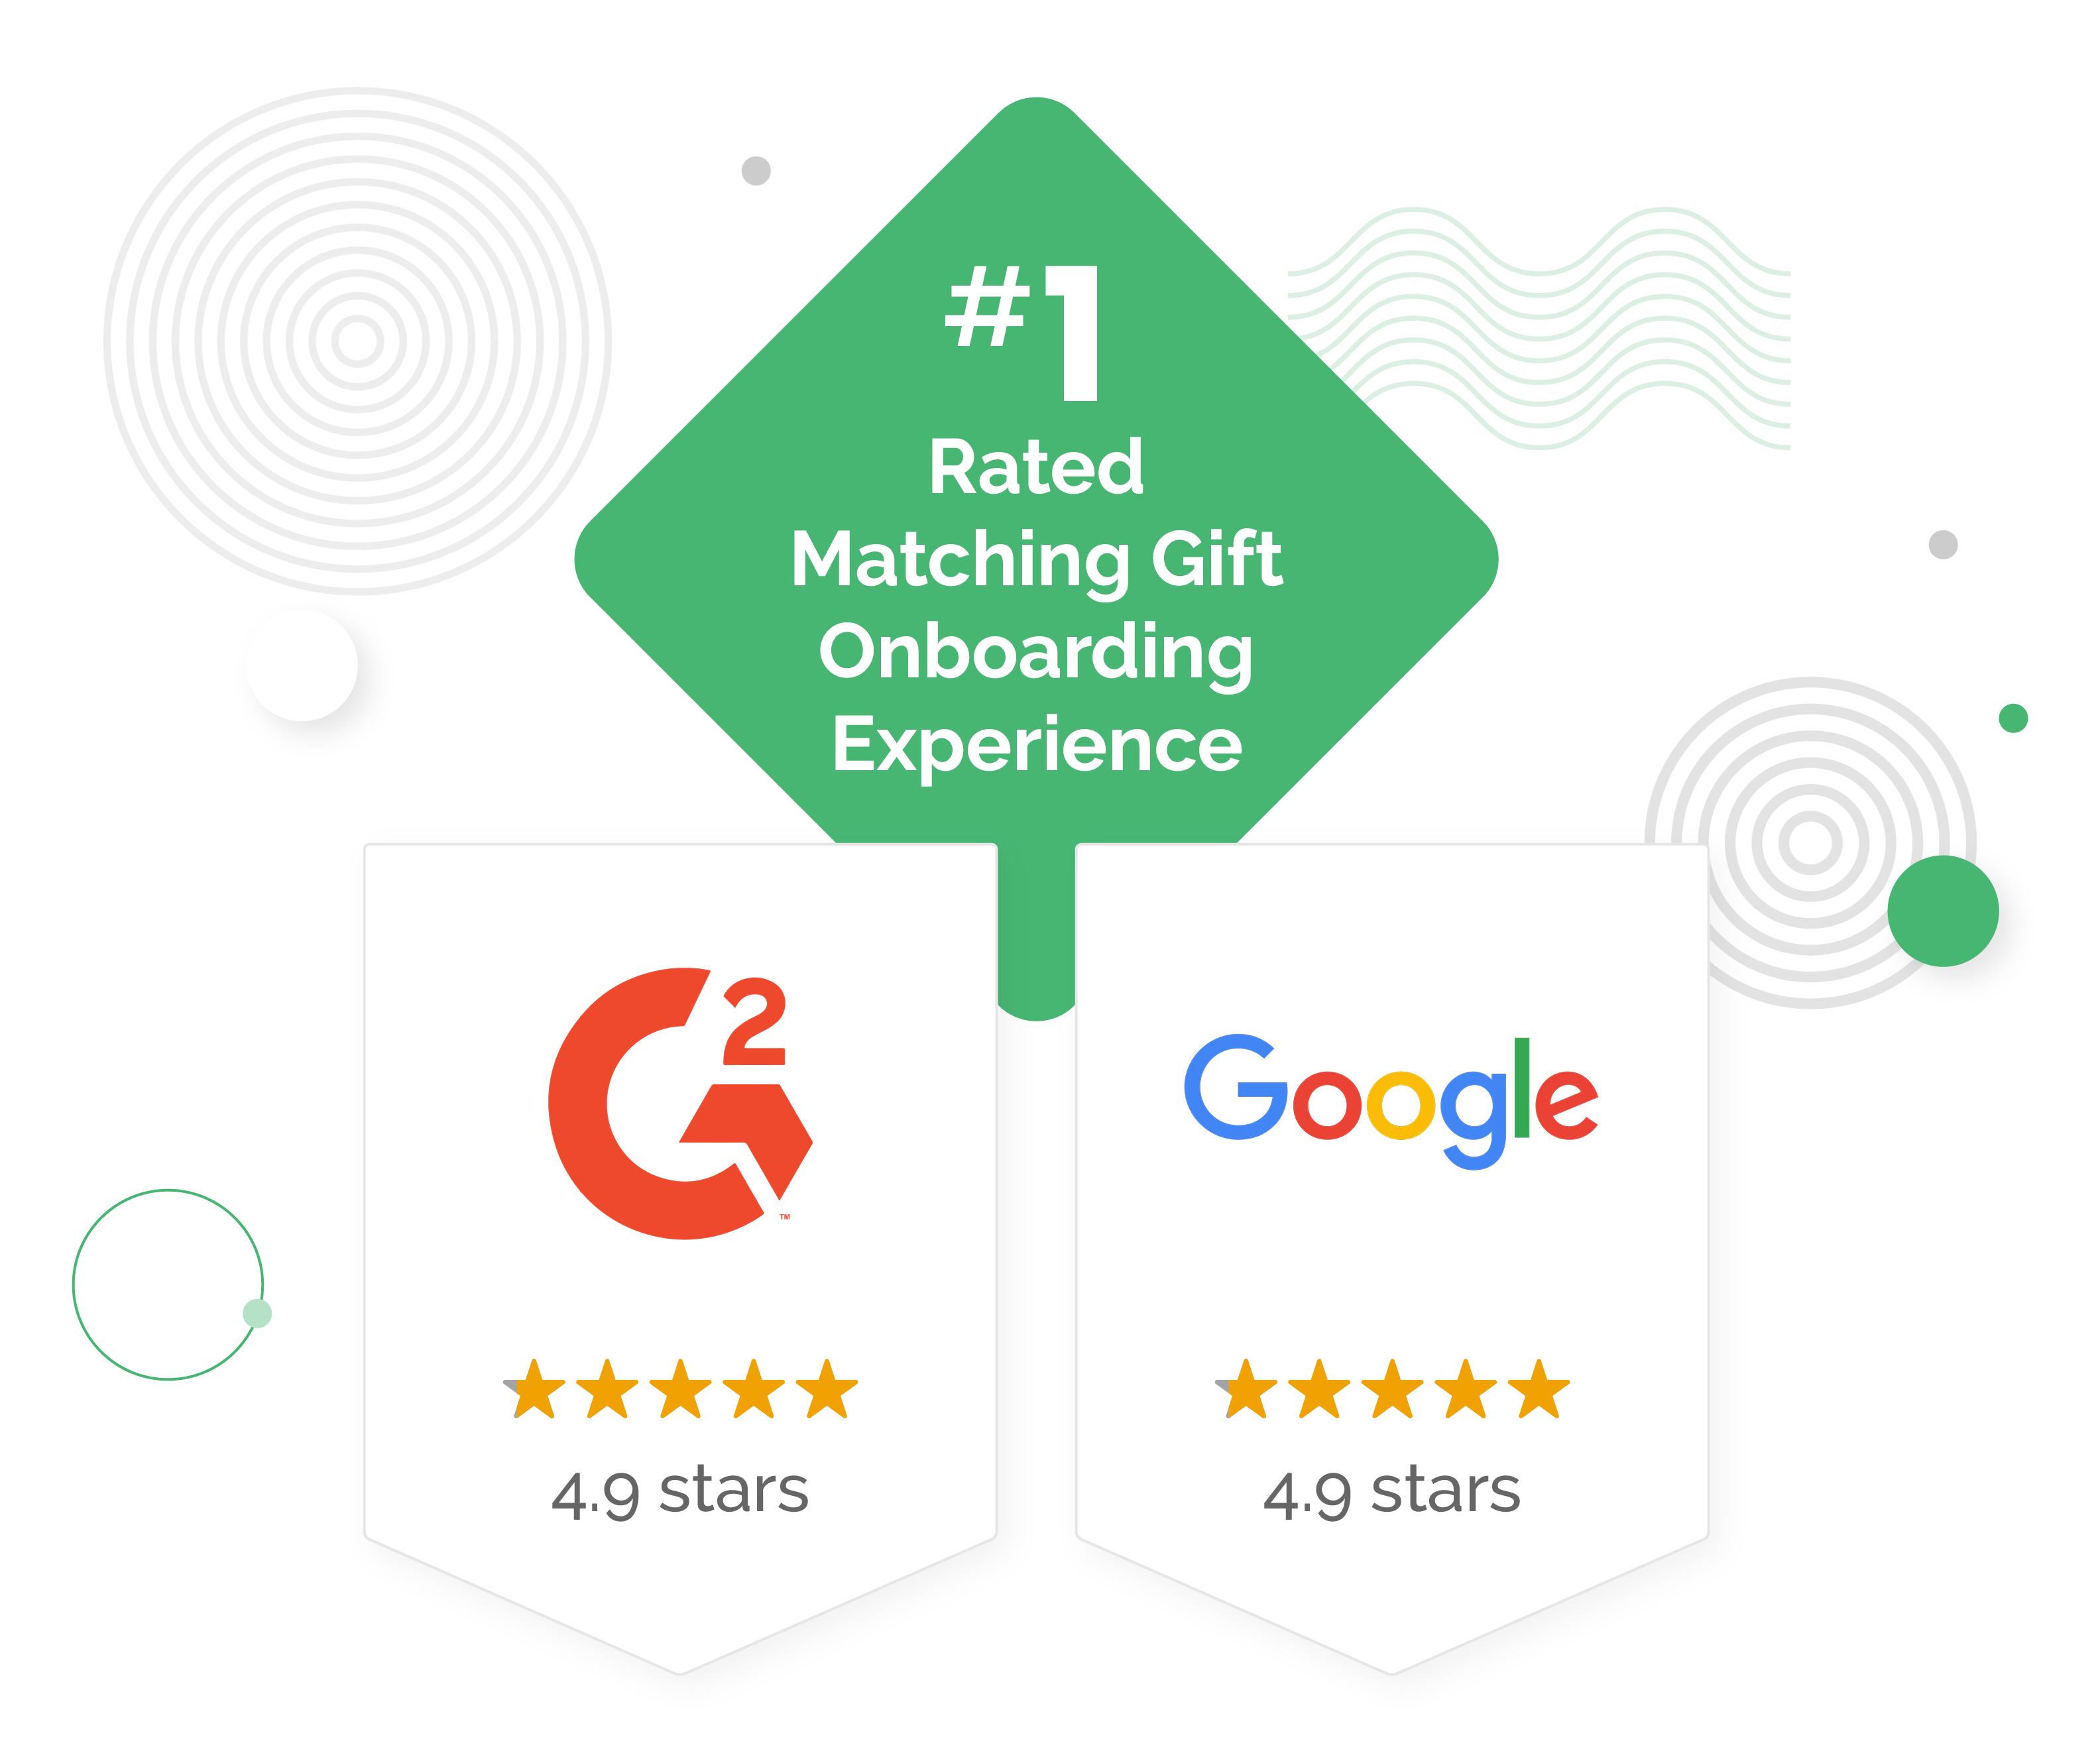 Image shows positive reviews from Google and G2, along with text that says "#1 rated matching gift onboarding experience